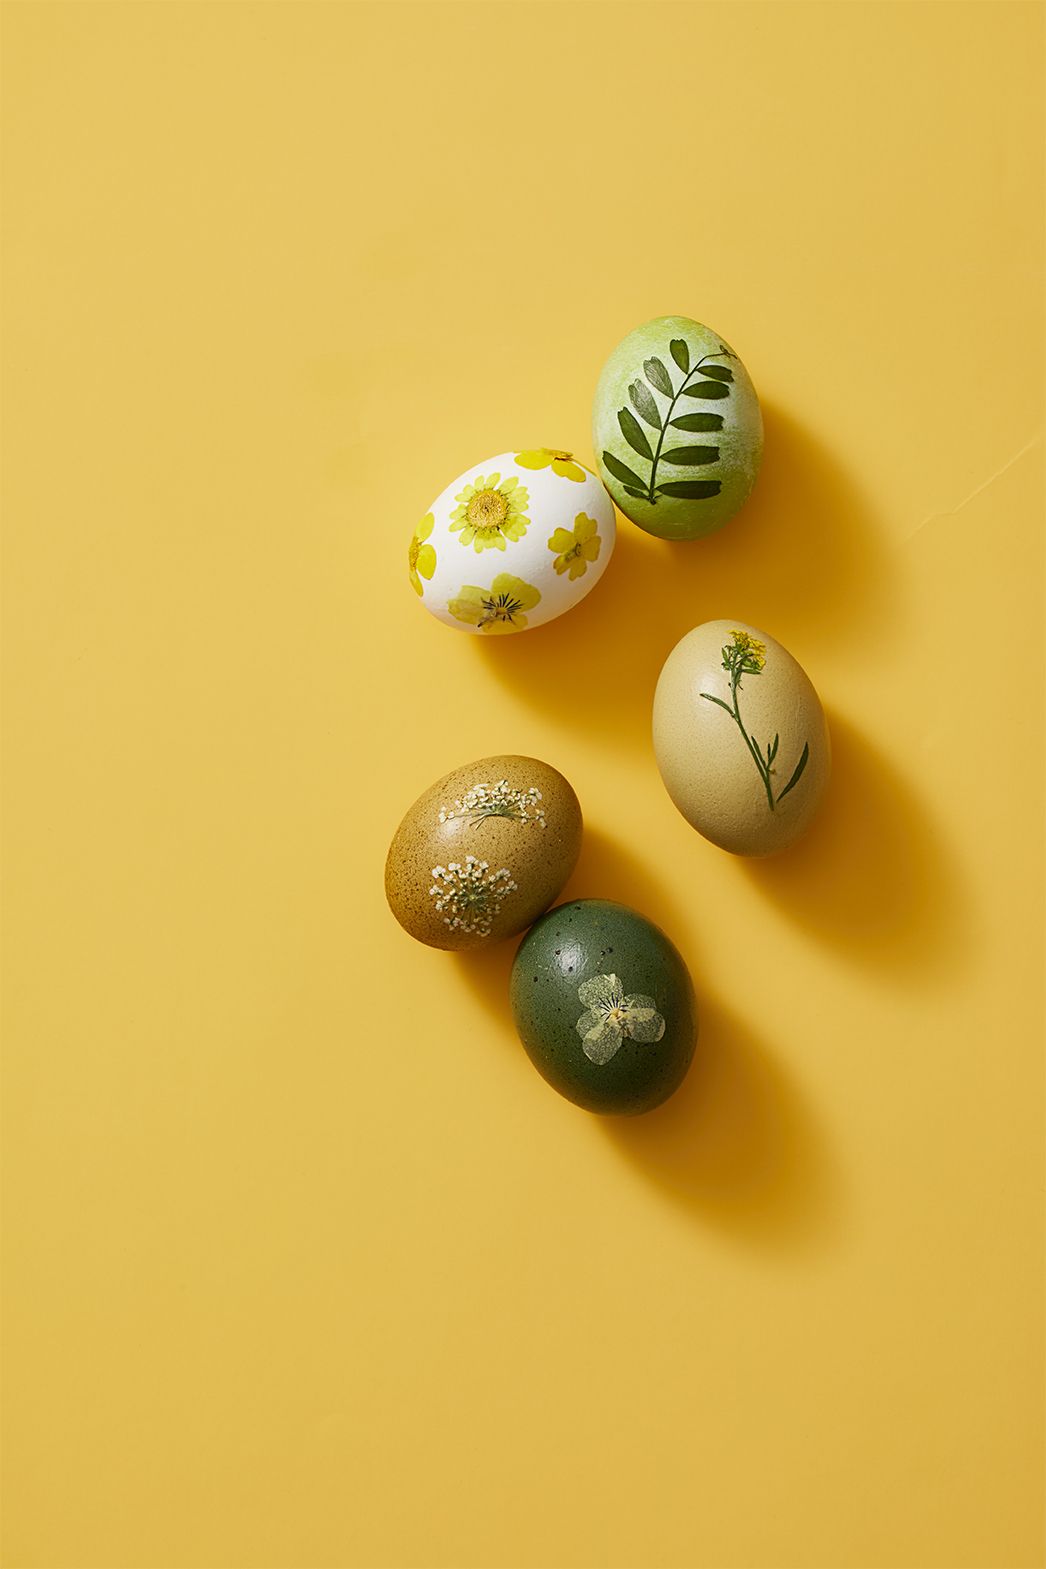 egg painting designs